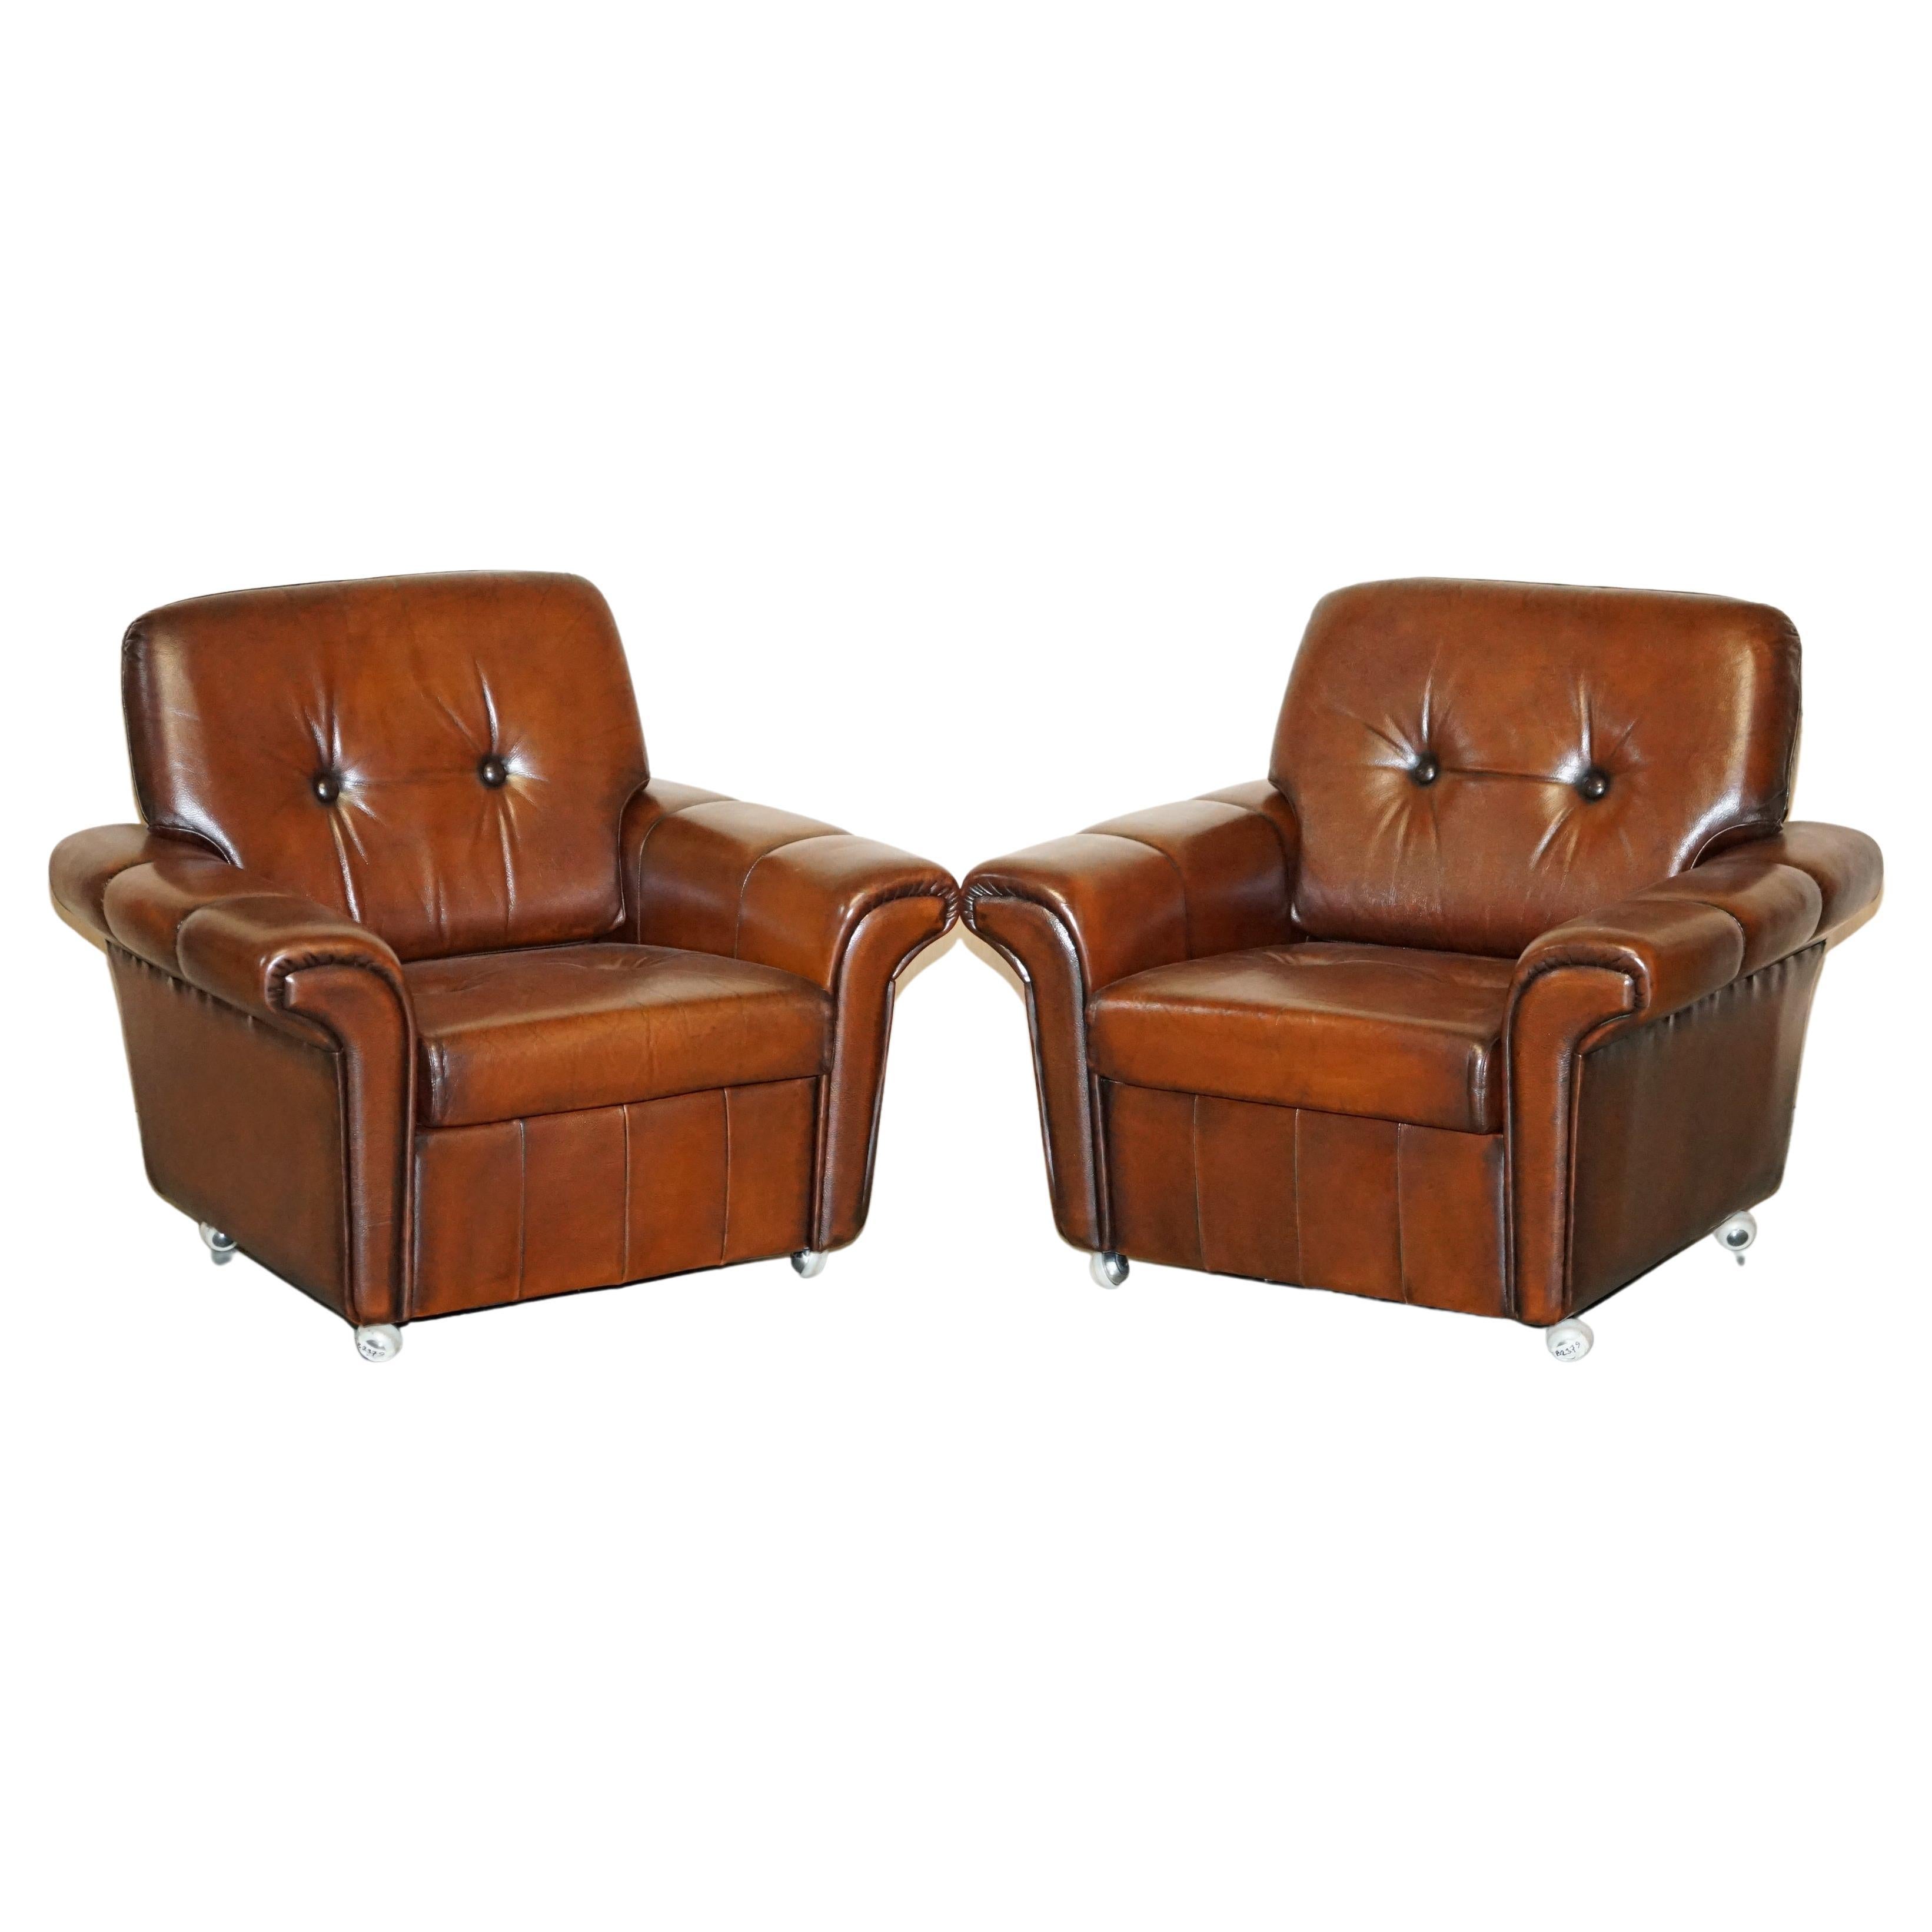 Pair of Fully Restored Vintage Dutch Mid-Century Modern Brown Leather Armchairs For Sale